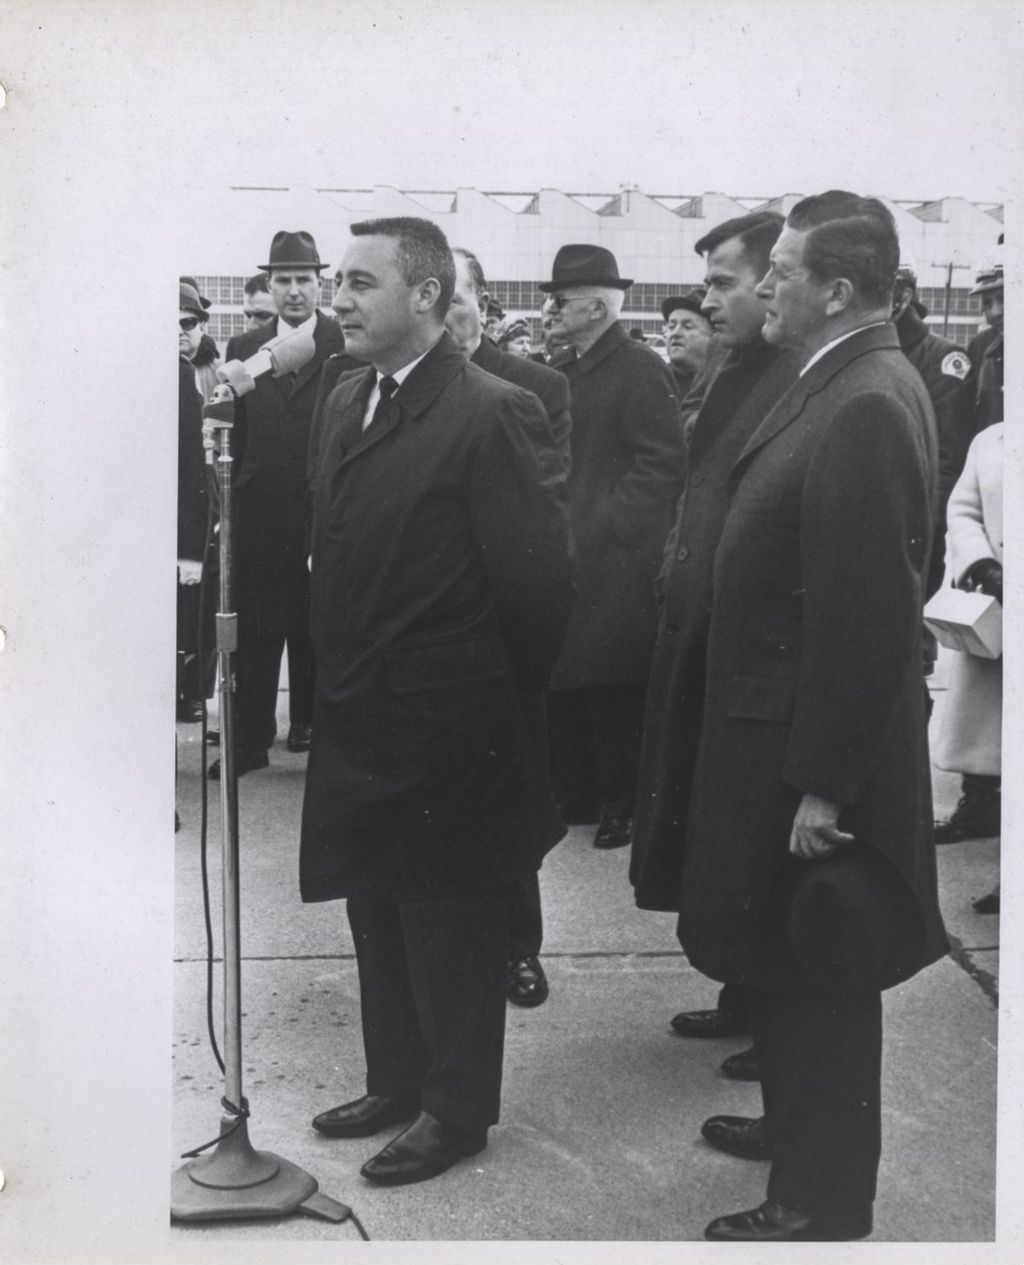 Gus Grissom speaking at the airport